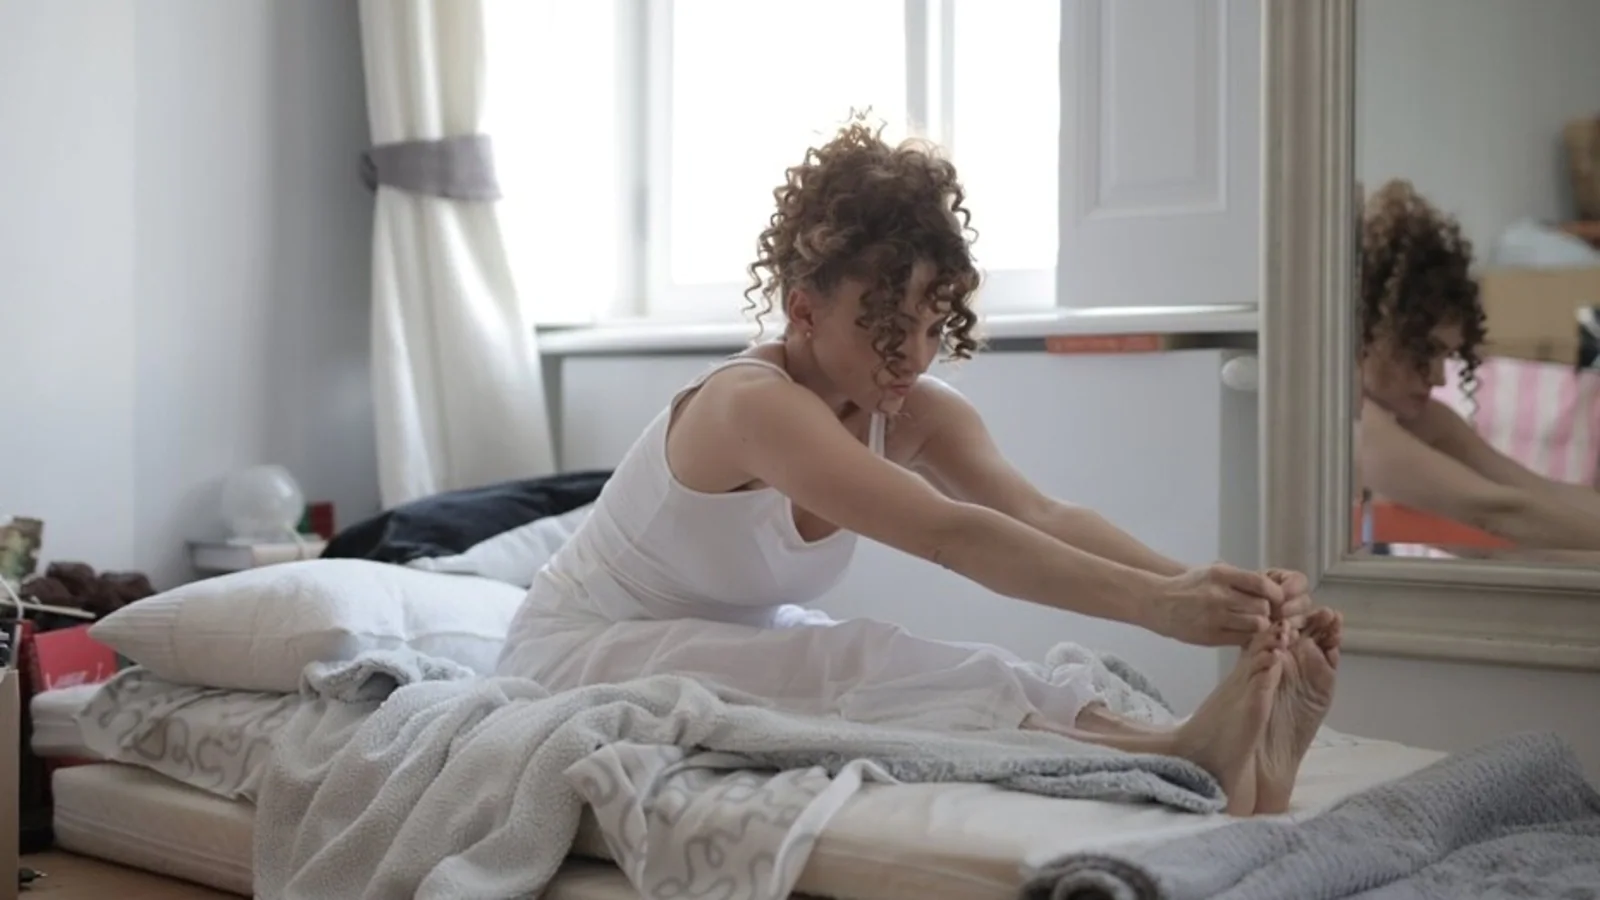 Too tired to hit the gym? 6 exercises you can do from your bed